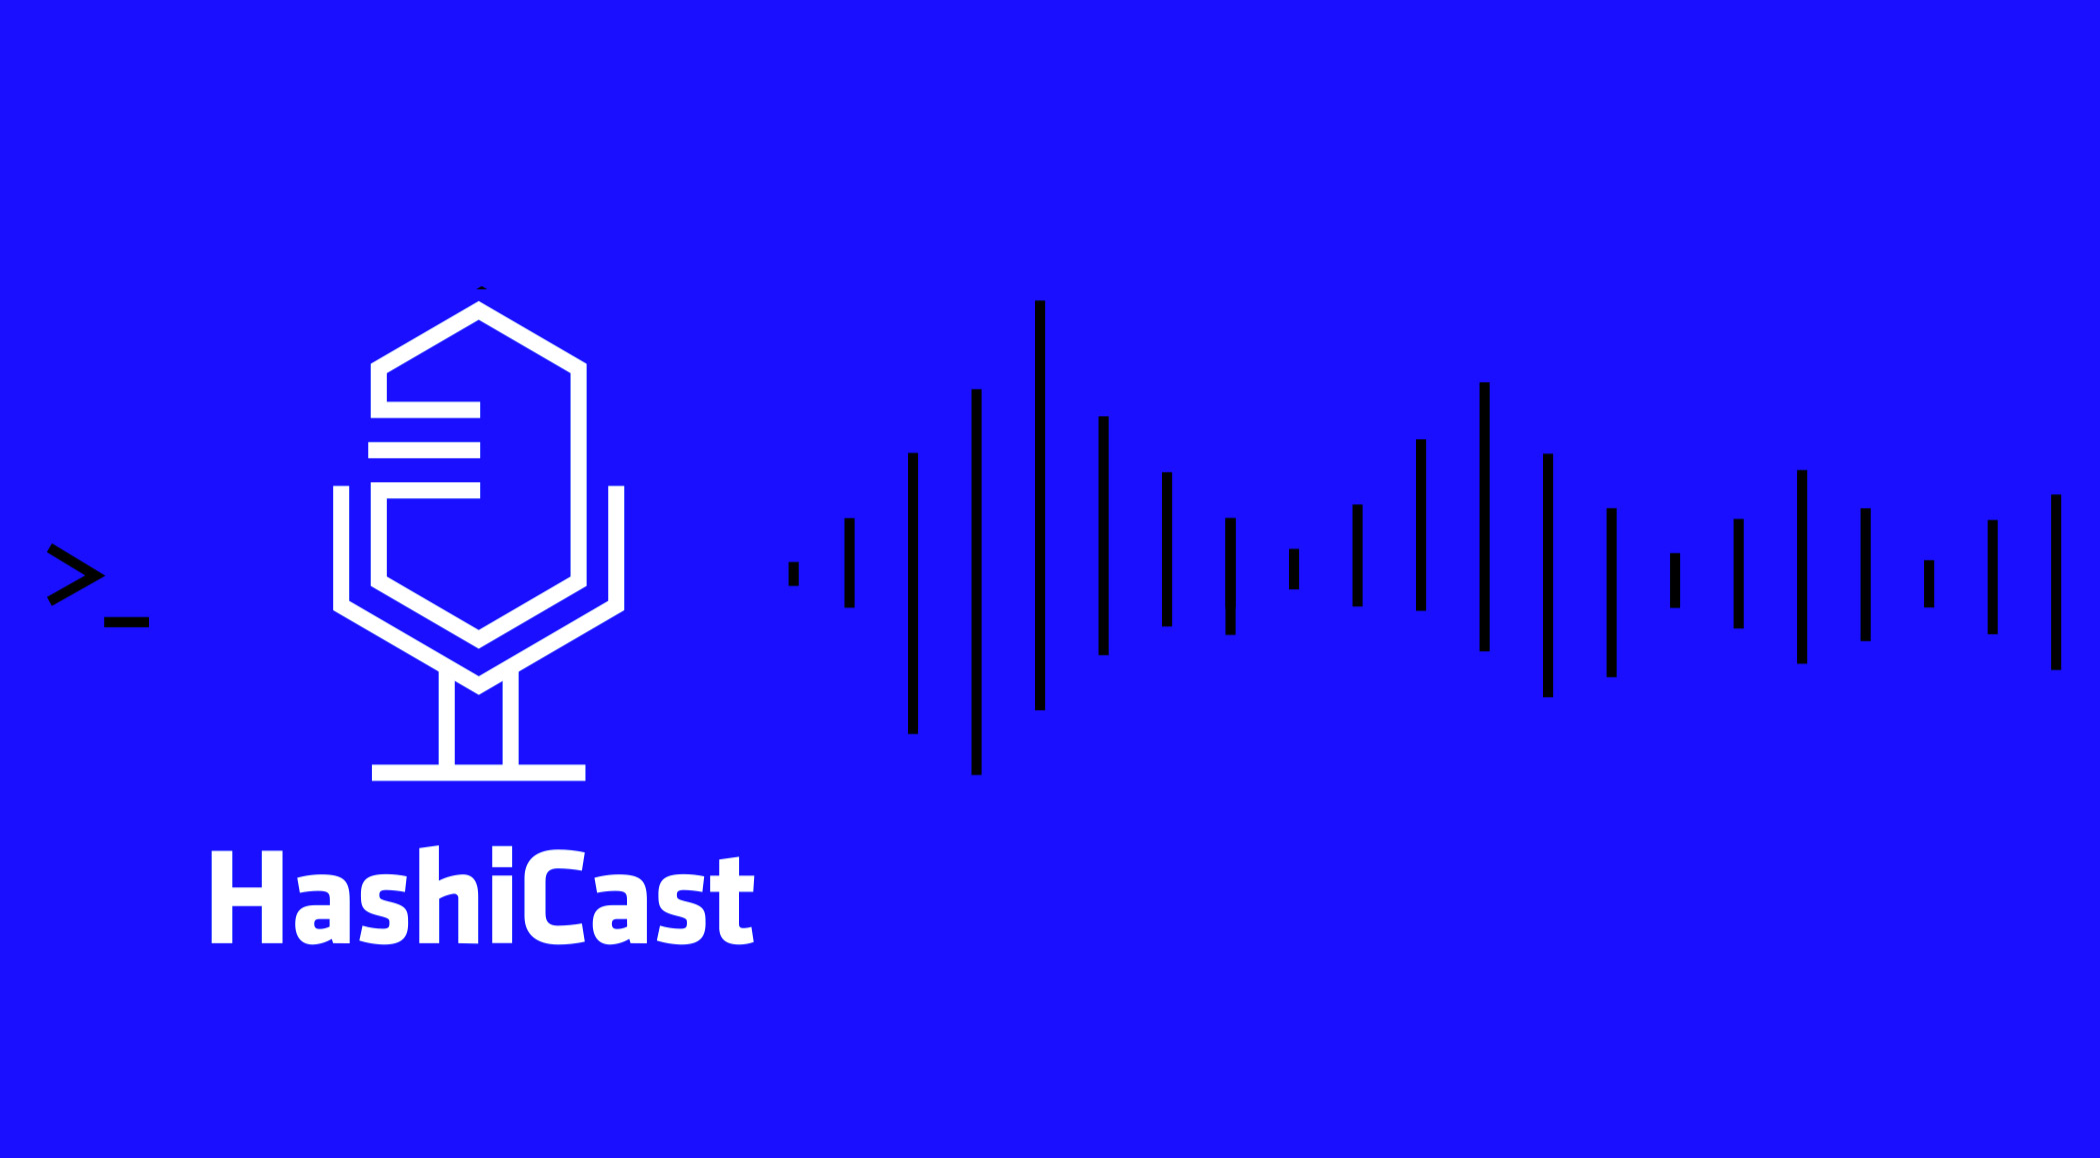 Introducing a new HashiCorp Women in Tech podcast series